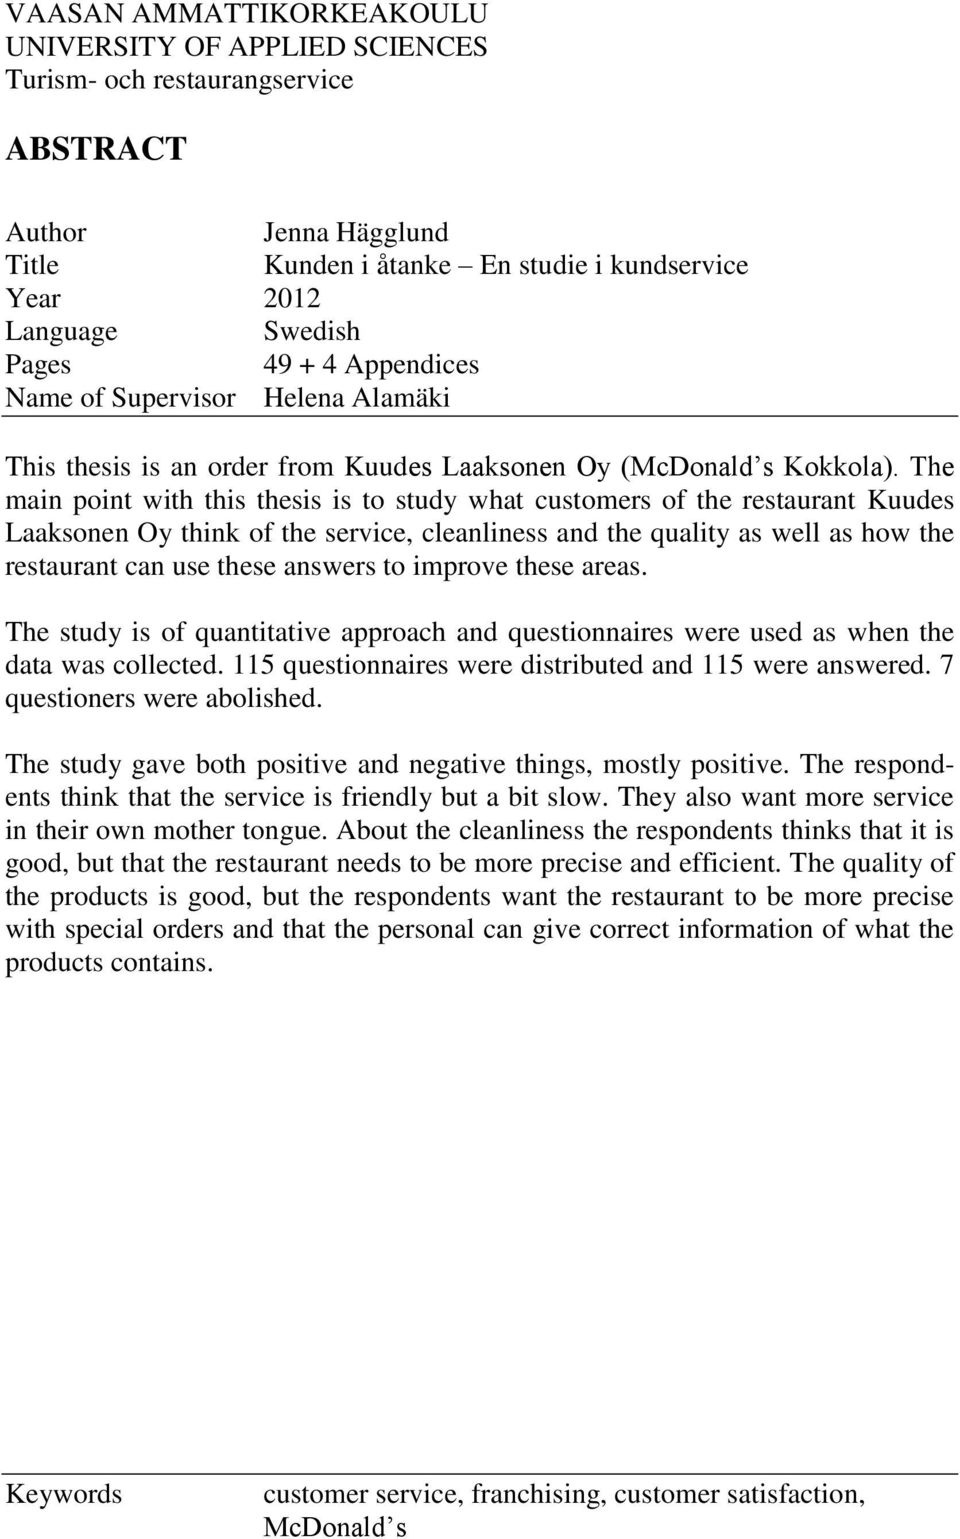 The main point with this thesis is to study what customers of the restaurant Kuudes Laaksonen Oy think of the service, cleanliness and the quality as well as how the restaurant can use these answers